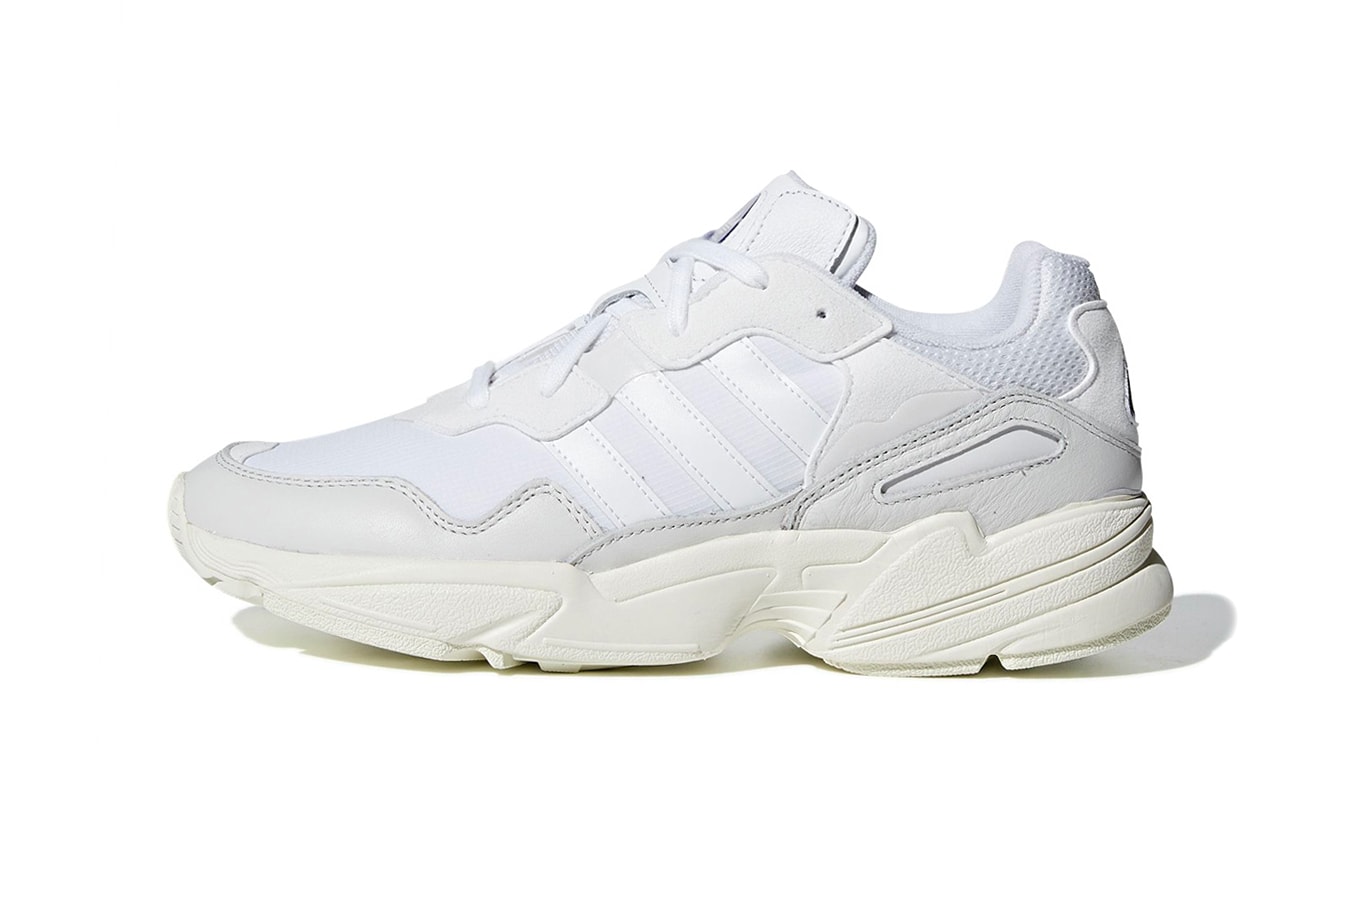 adidas Yung 96 First Look Cloud Crystal White